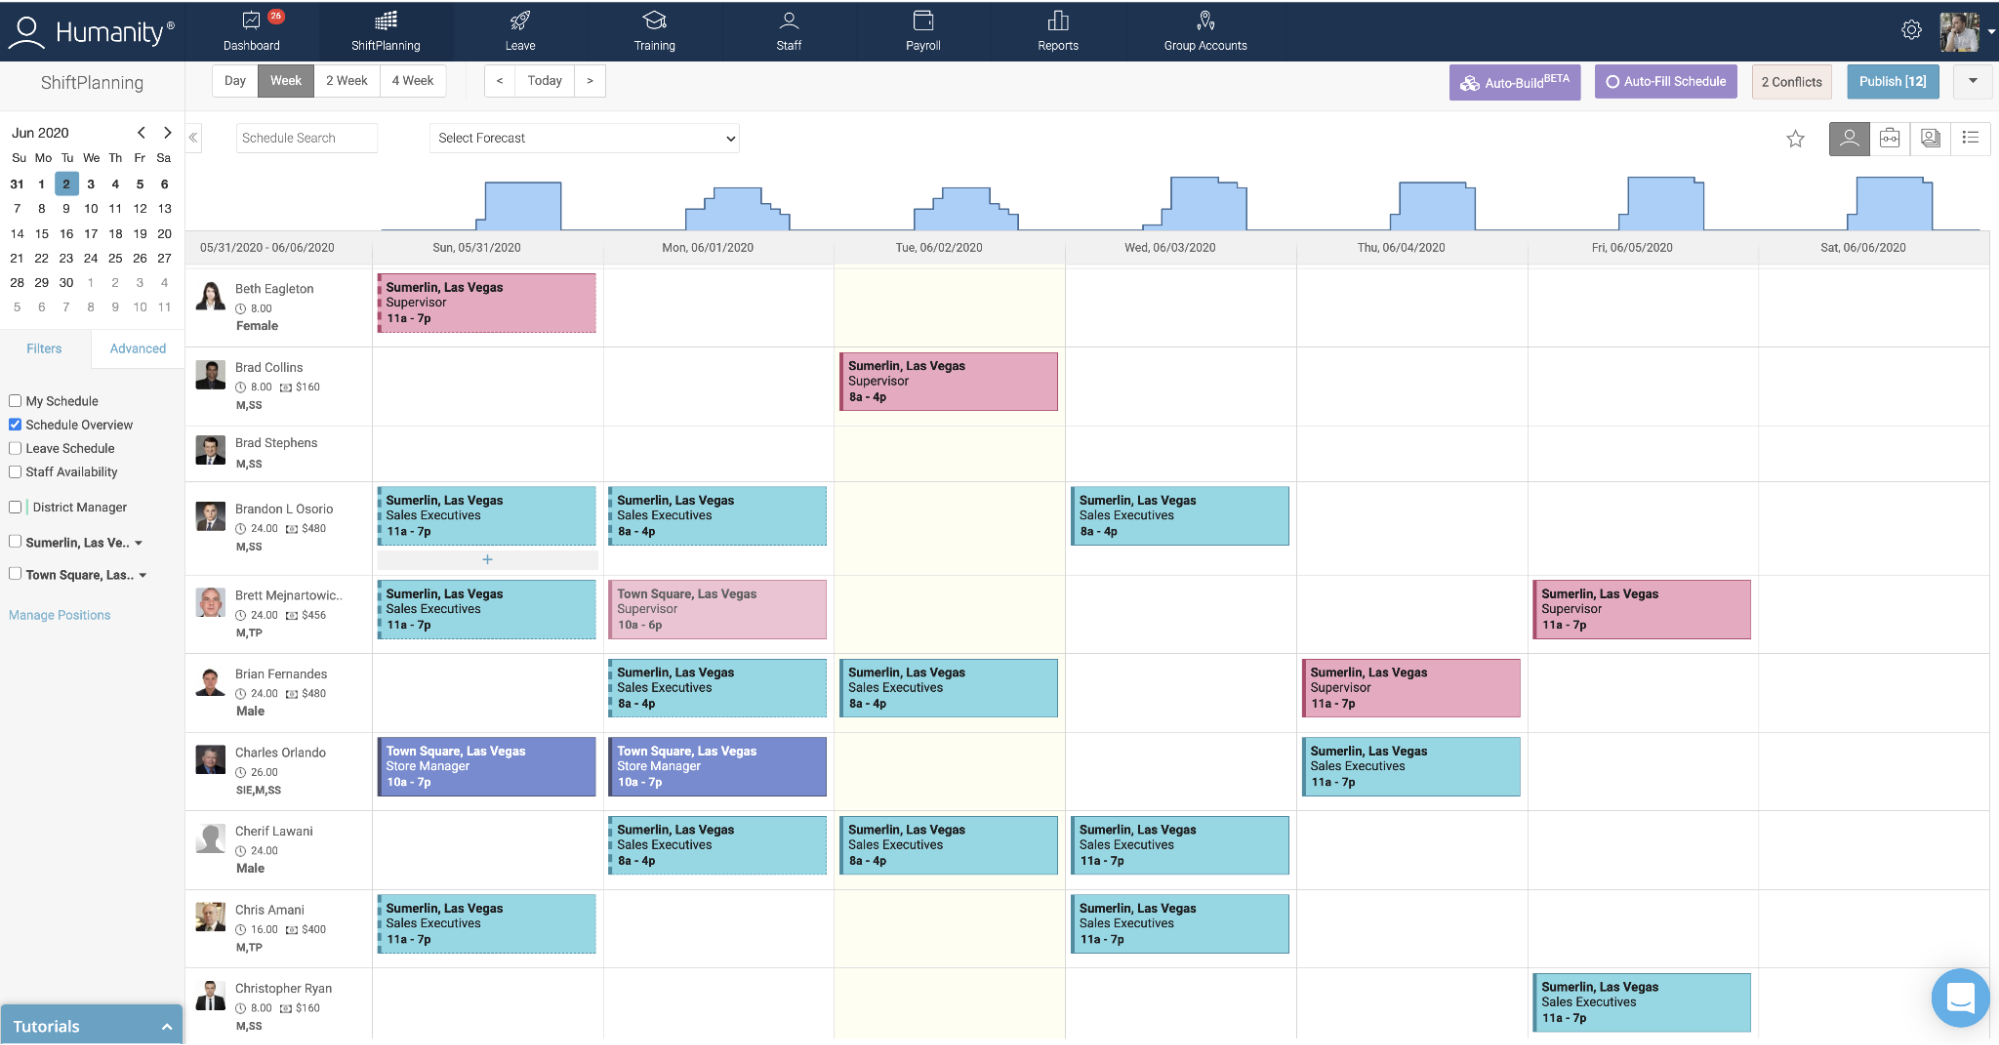 A screenshot of the Humanity scheduling dashboard.